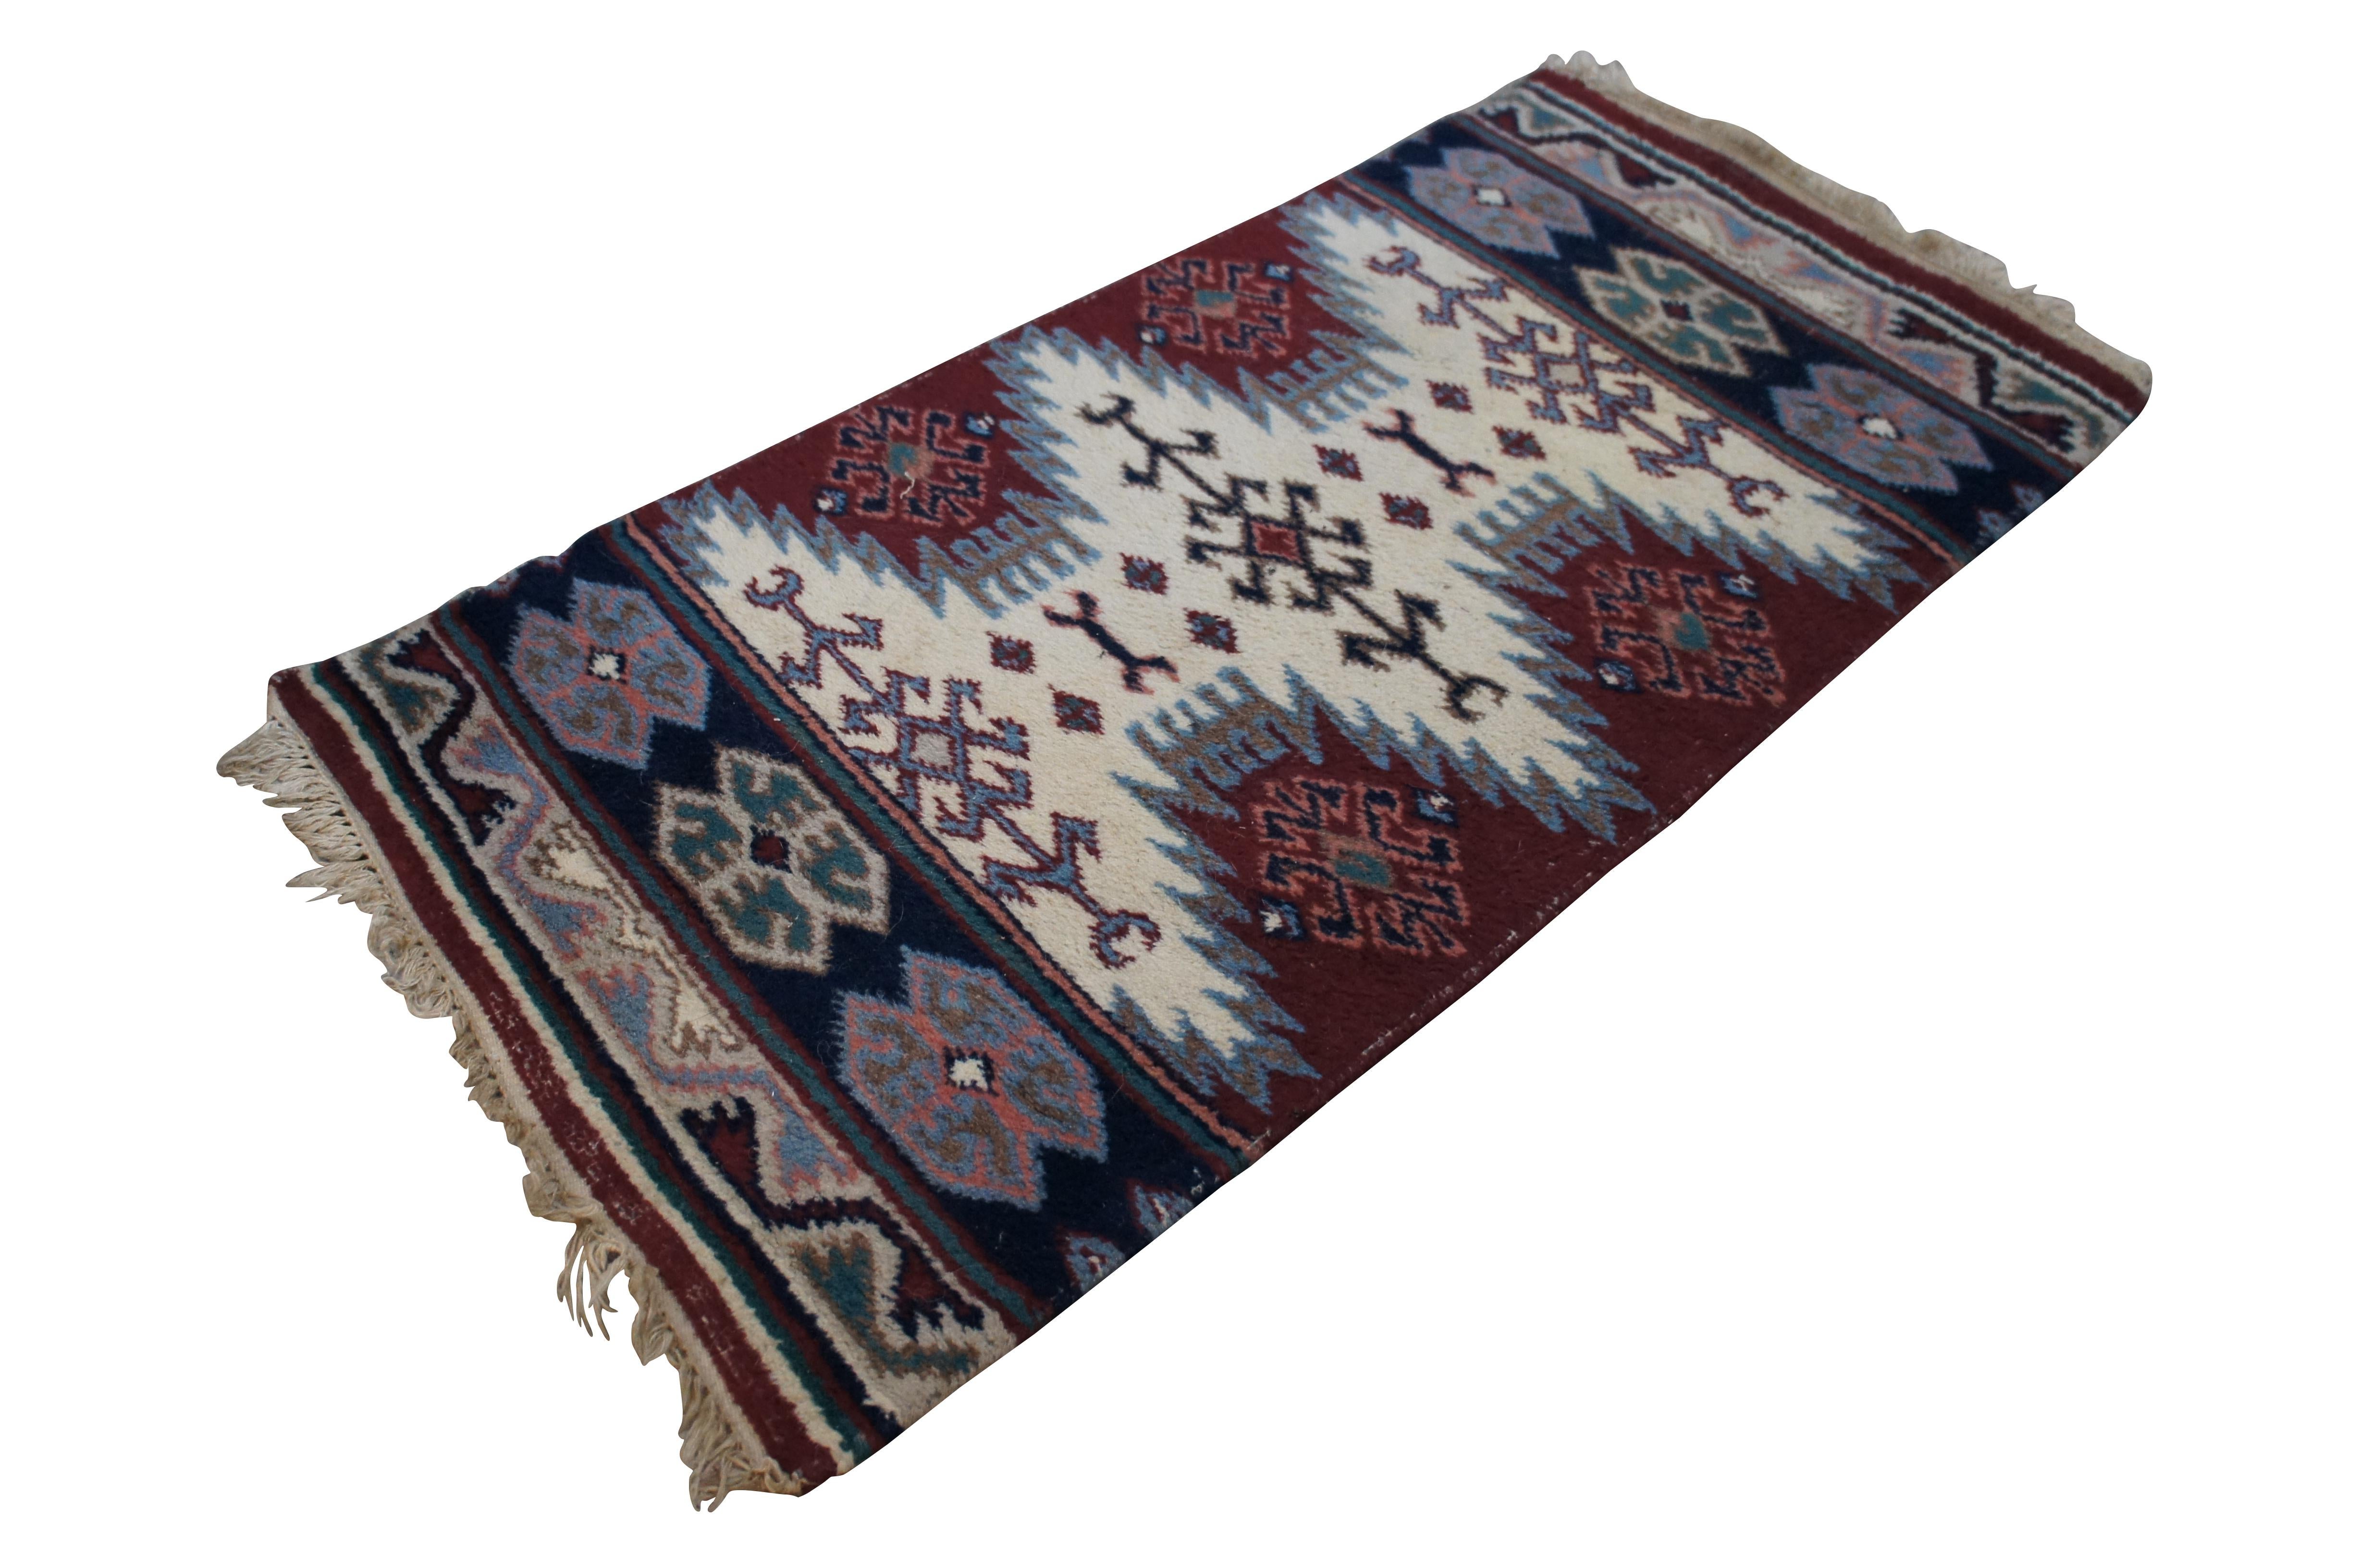 20th century small hand knotted Turkish wool rug / mat featuring a geometric pattern in red, cream, navy, blue, and pink. Rug sports a low pile, hand bound side edges and knotted fringe at the ends.

DIMENSIONS
55” x 27.5” / 4.6’ x 2.3’ (Length x